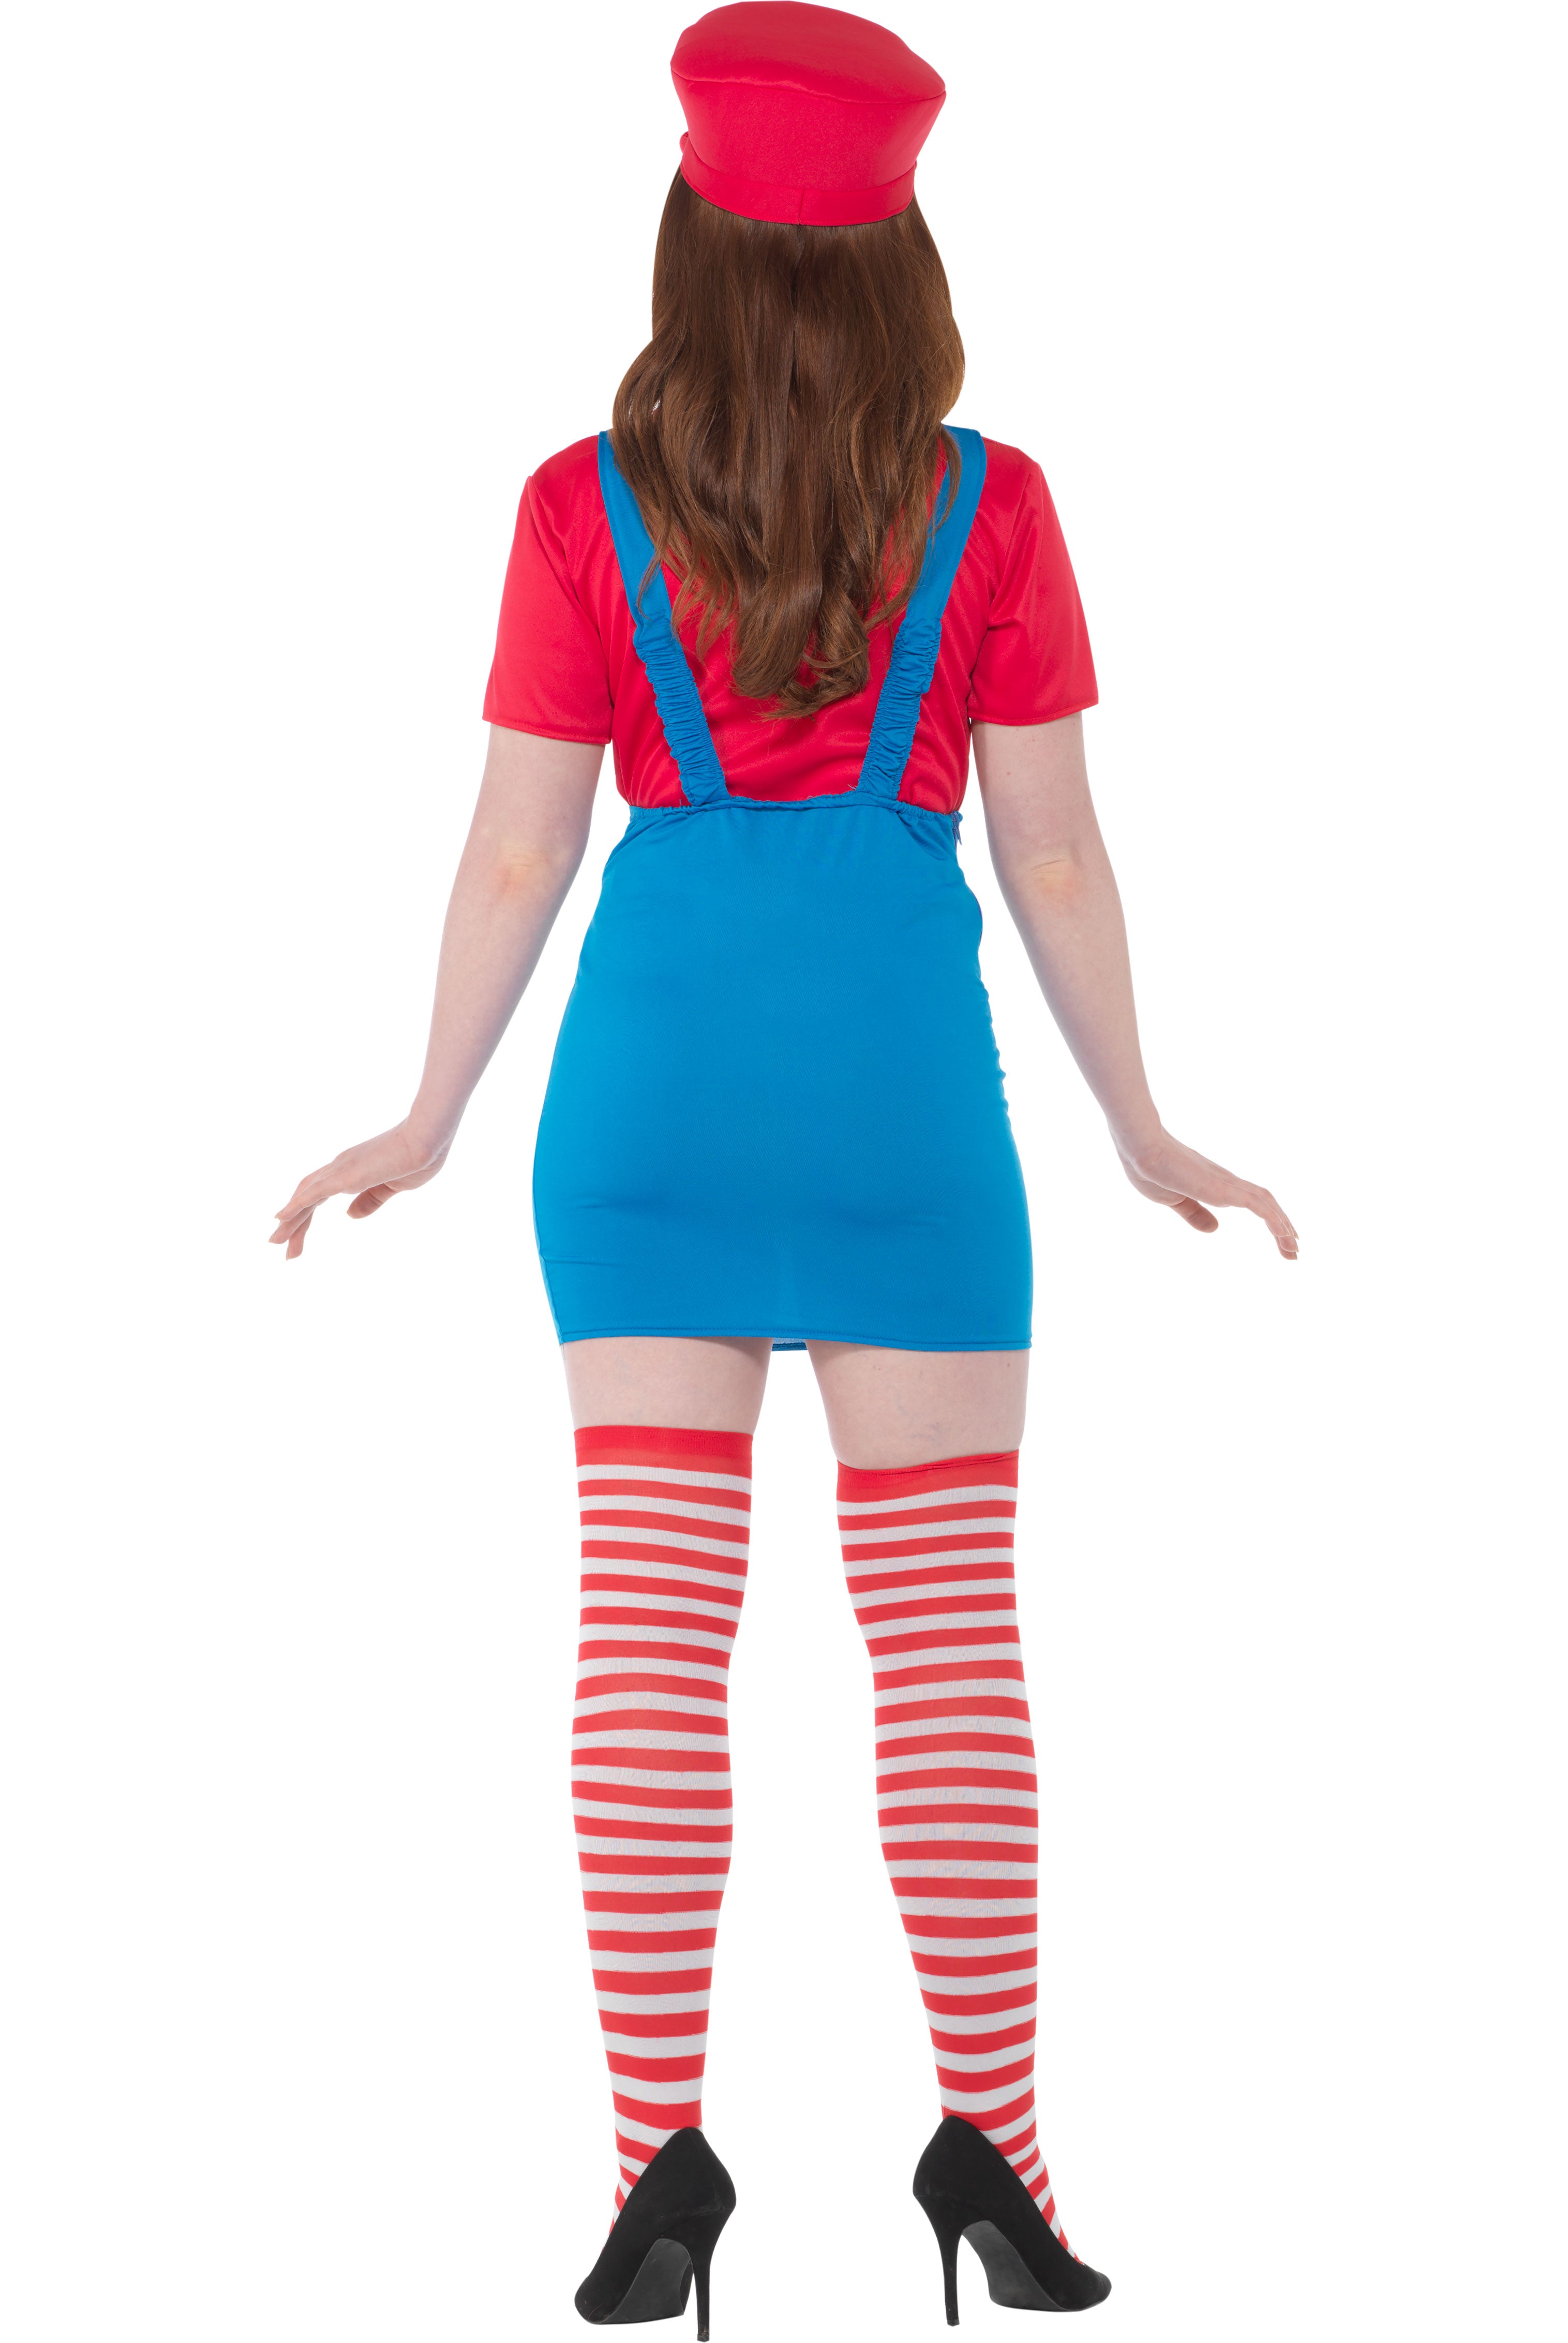 Plumber Dress Red Adult Costume